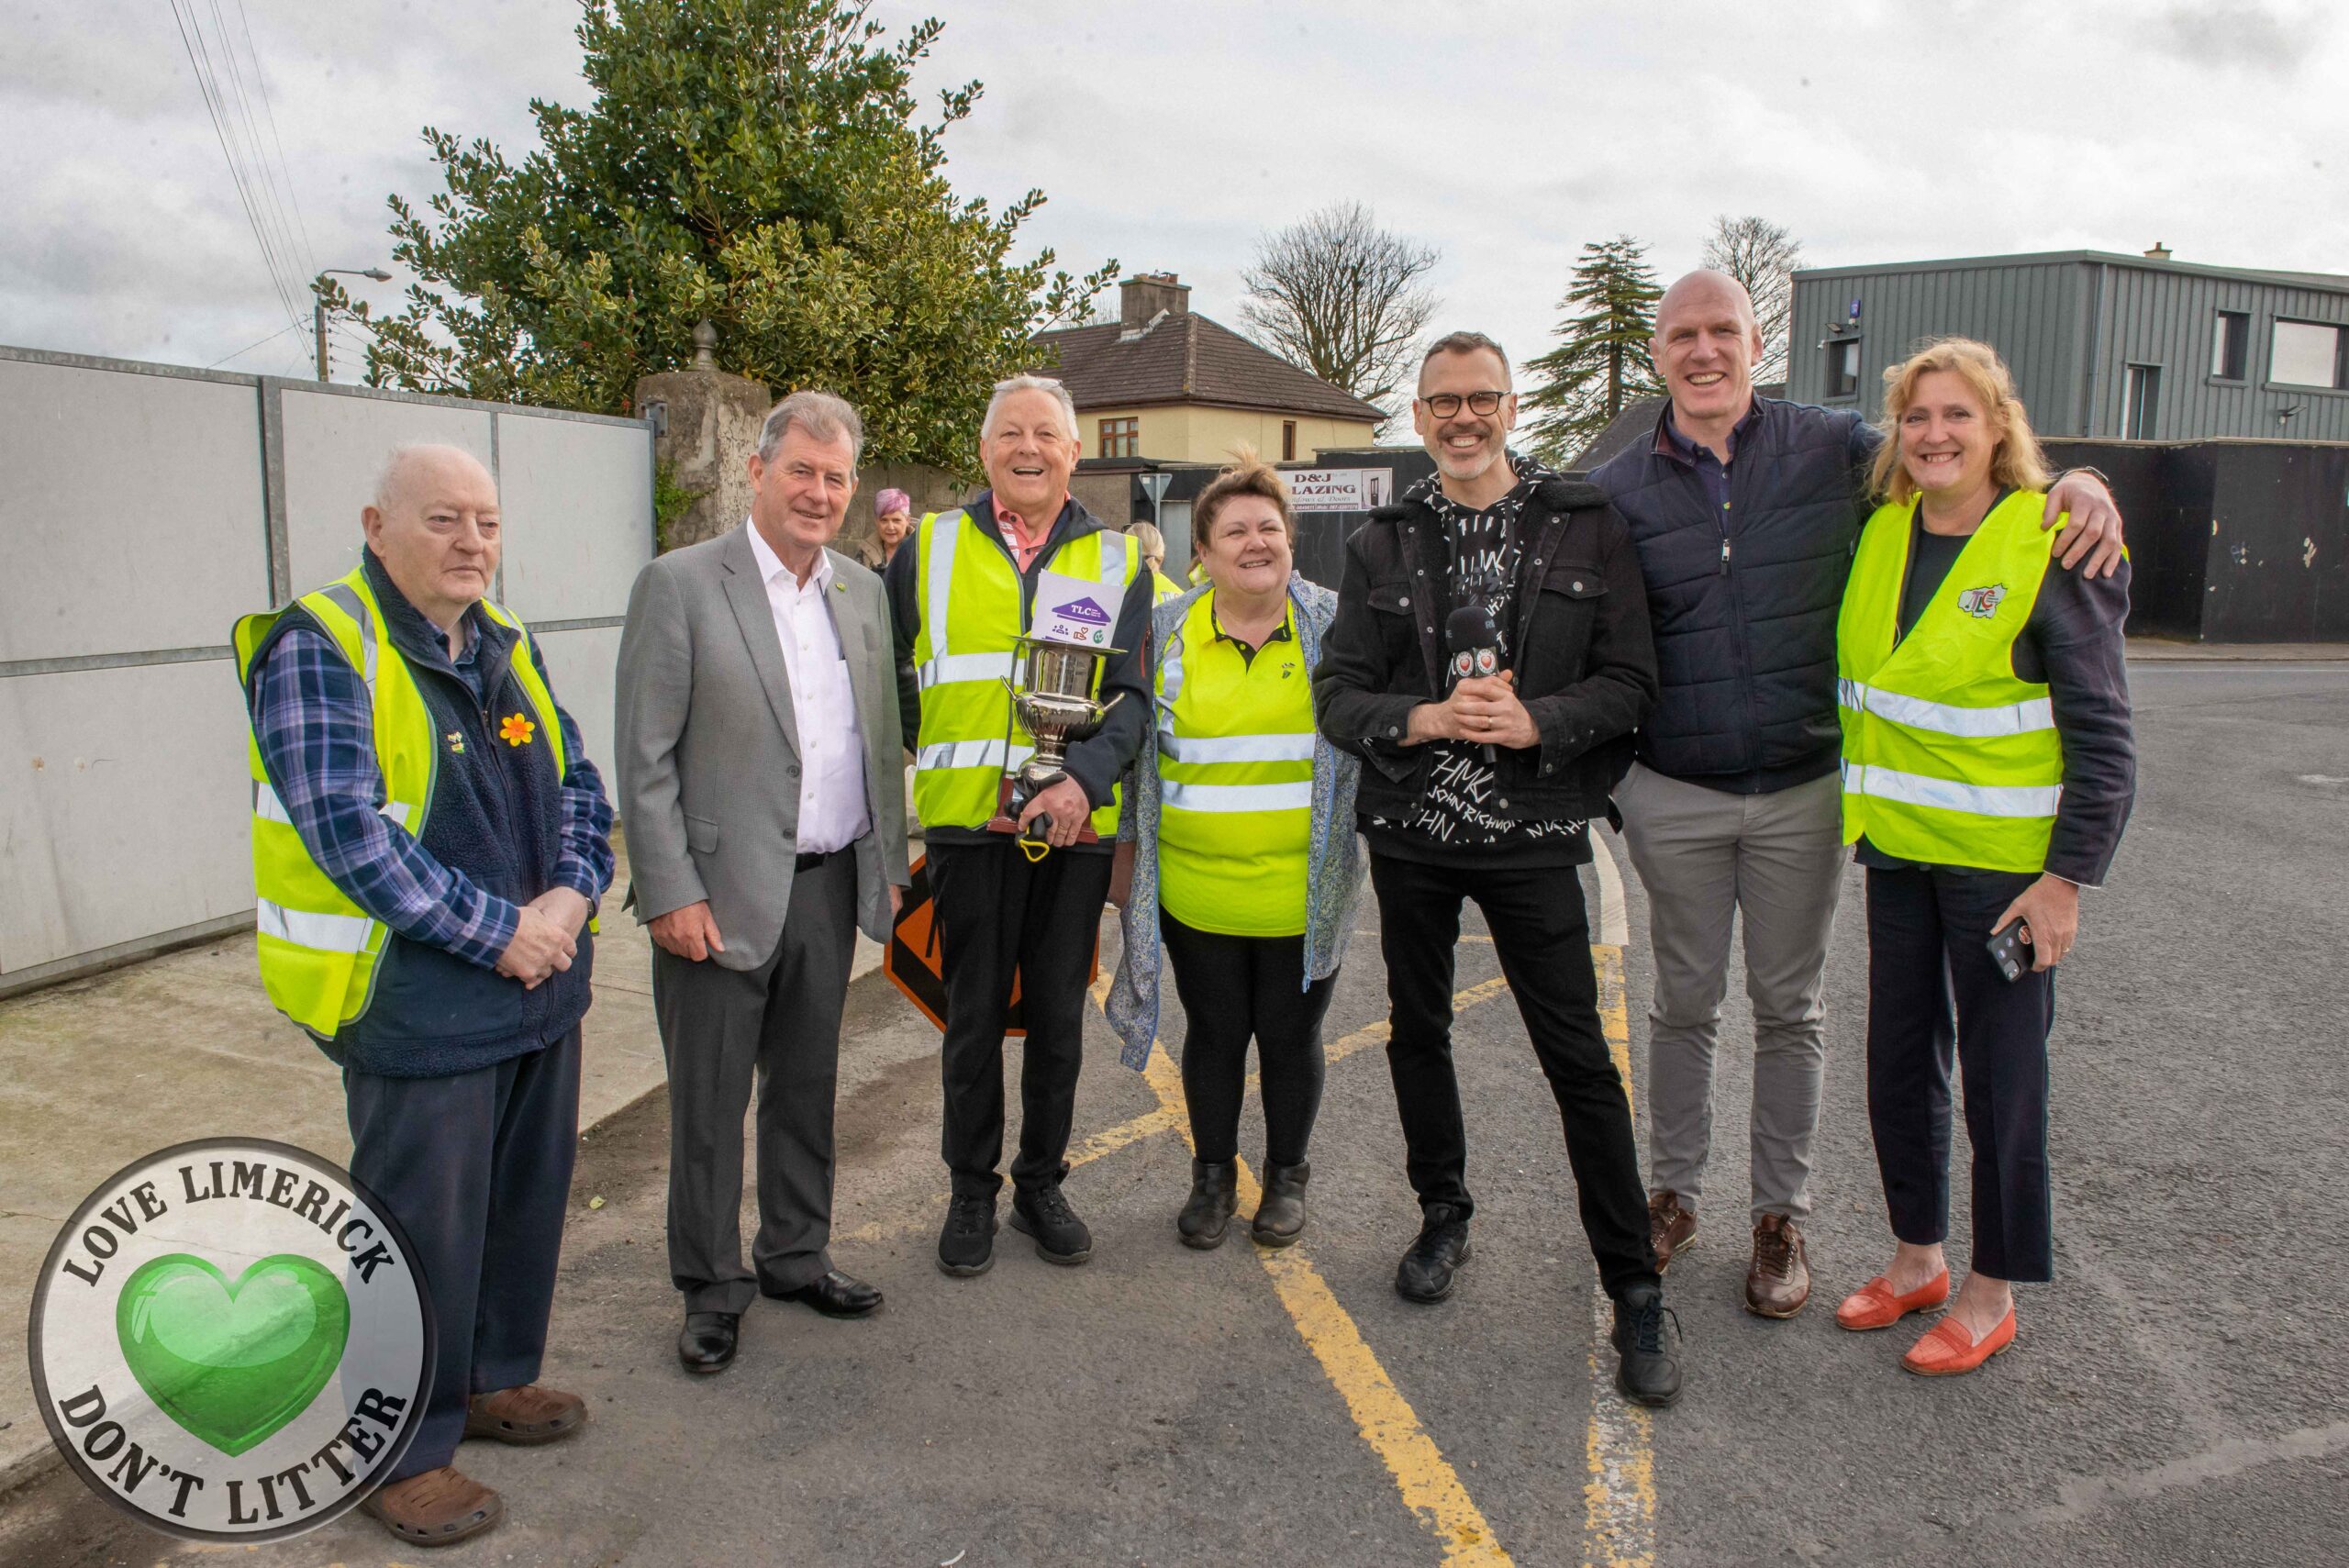 Team Limerick CleanUp 2023 celebrates an increase in popularity for its eighth year